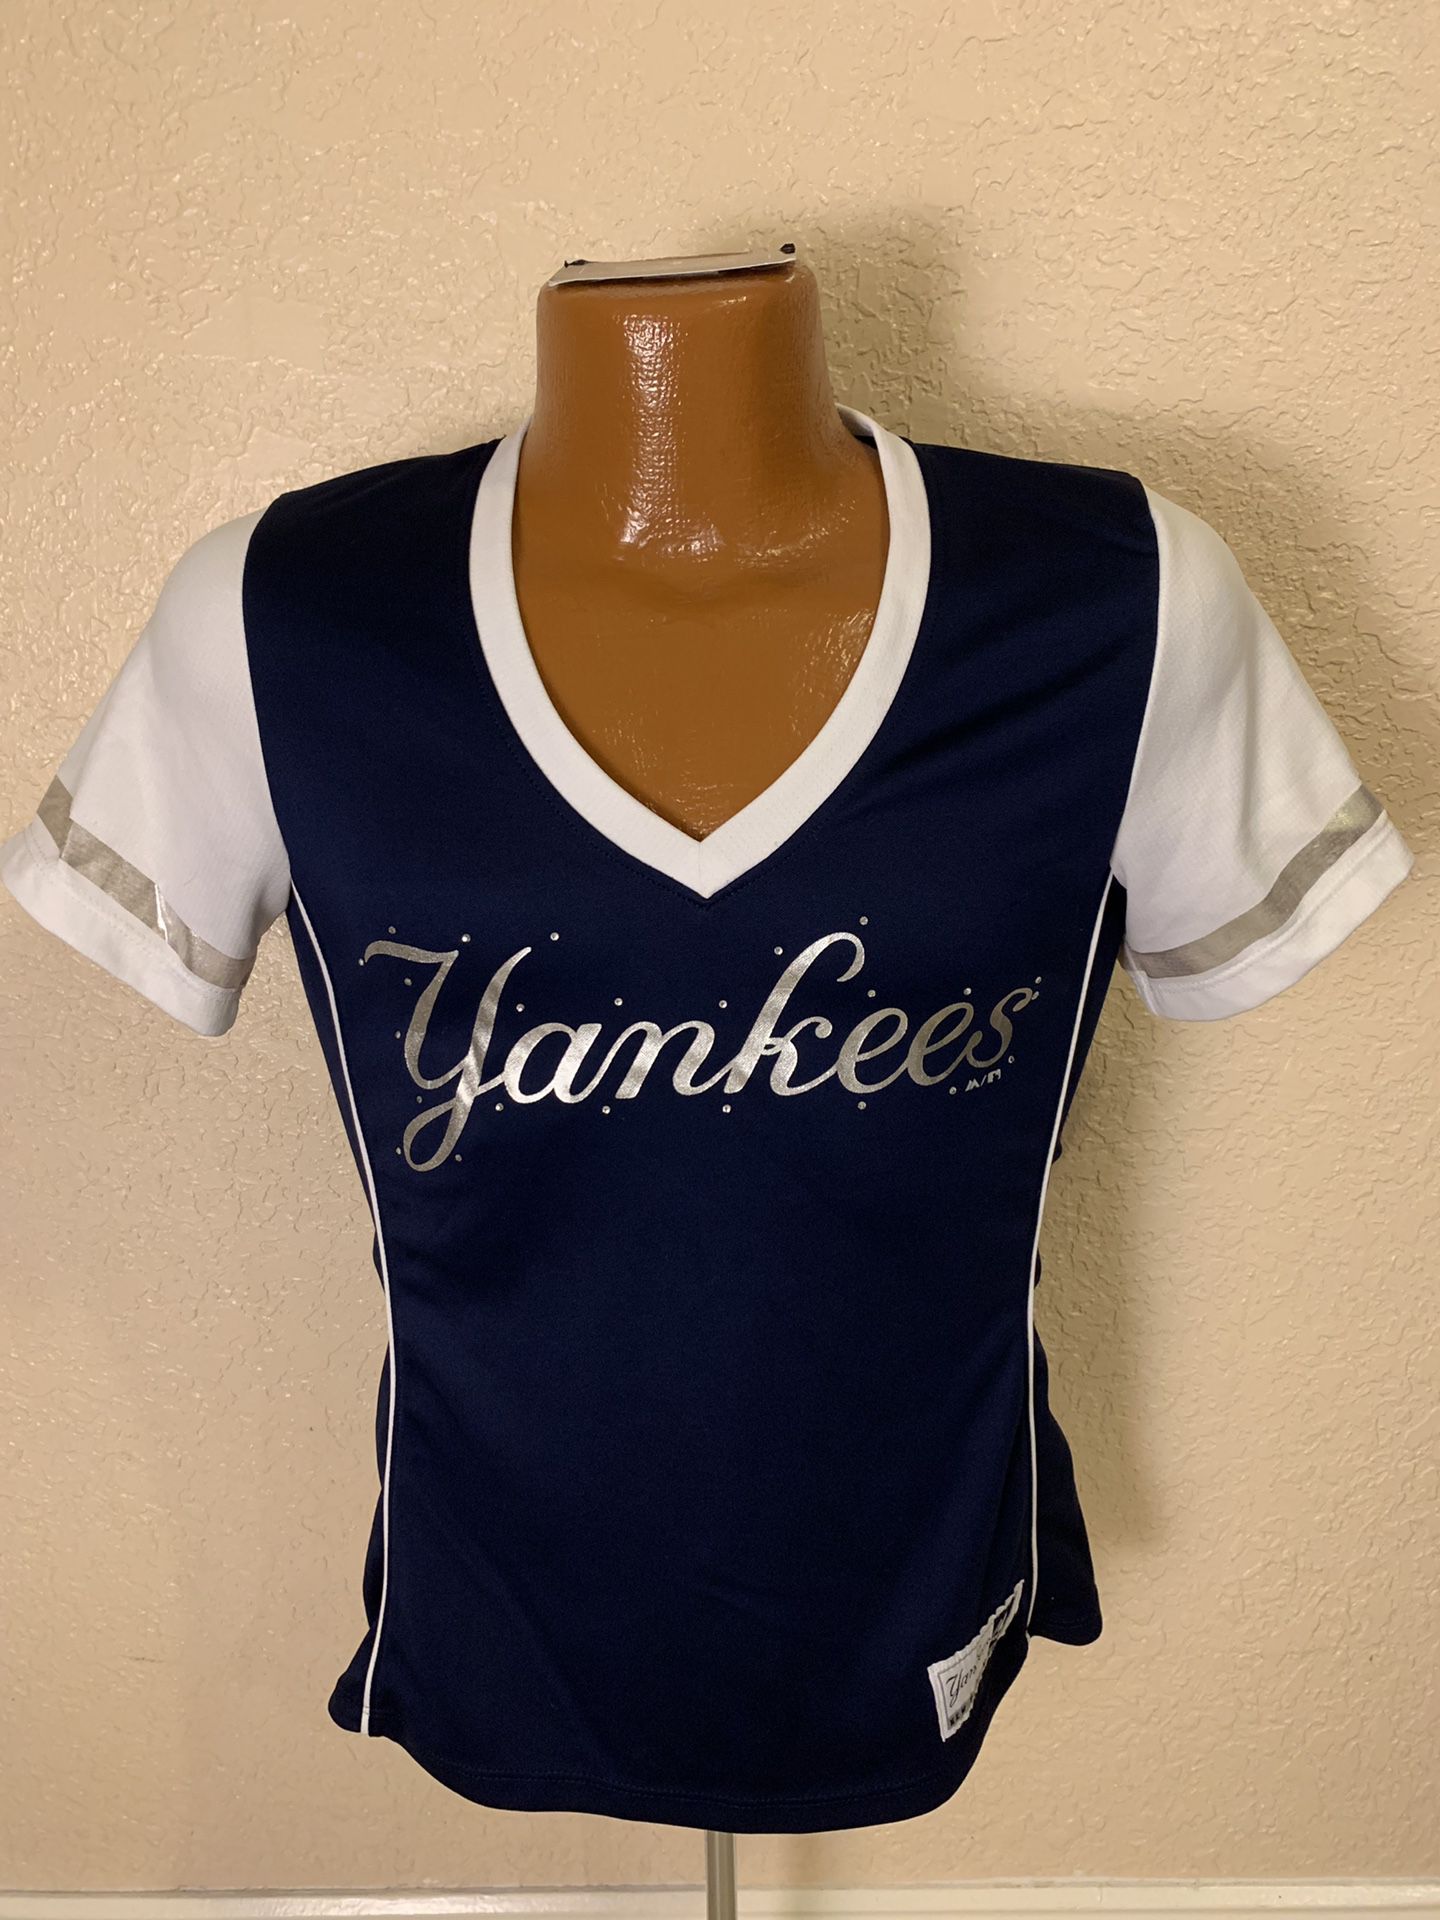 MLB New York Yankees Jeweled Jersey. Women’s Small. Great condition.